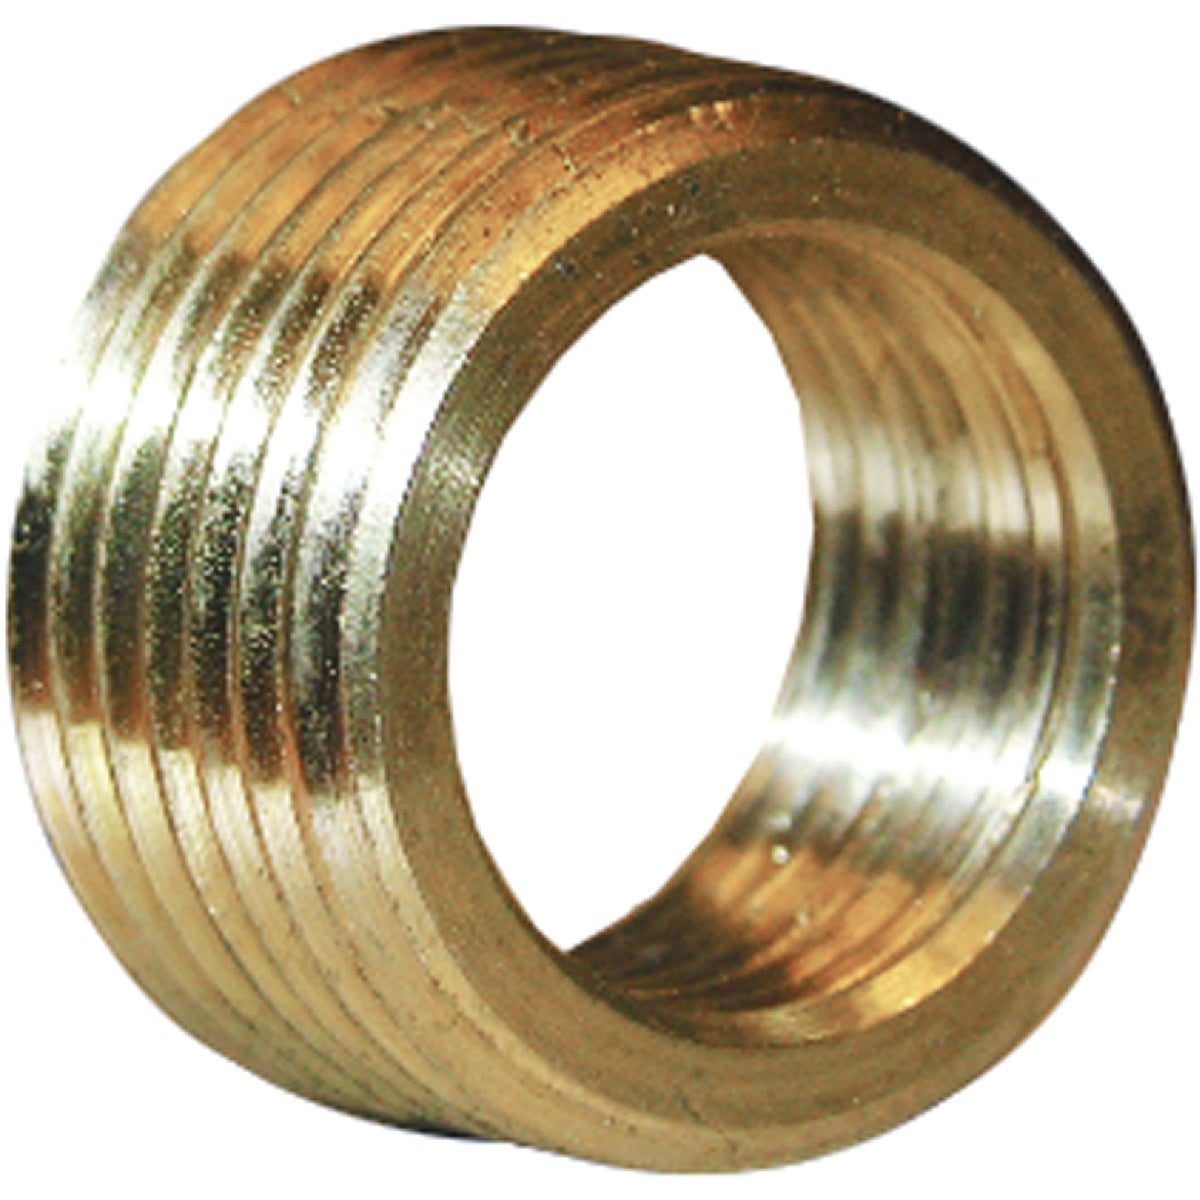 Lasco 1/2 In. MPT x 3/8 In. FPT Brass Face Bushing